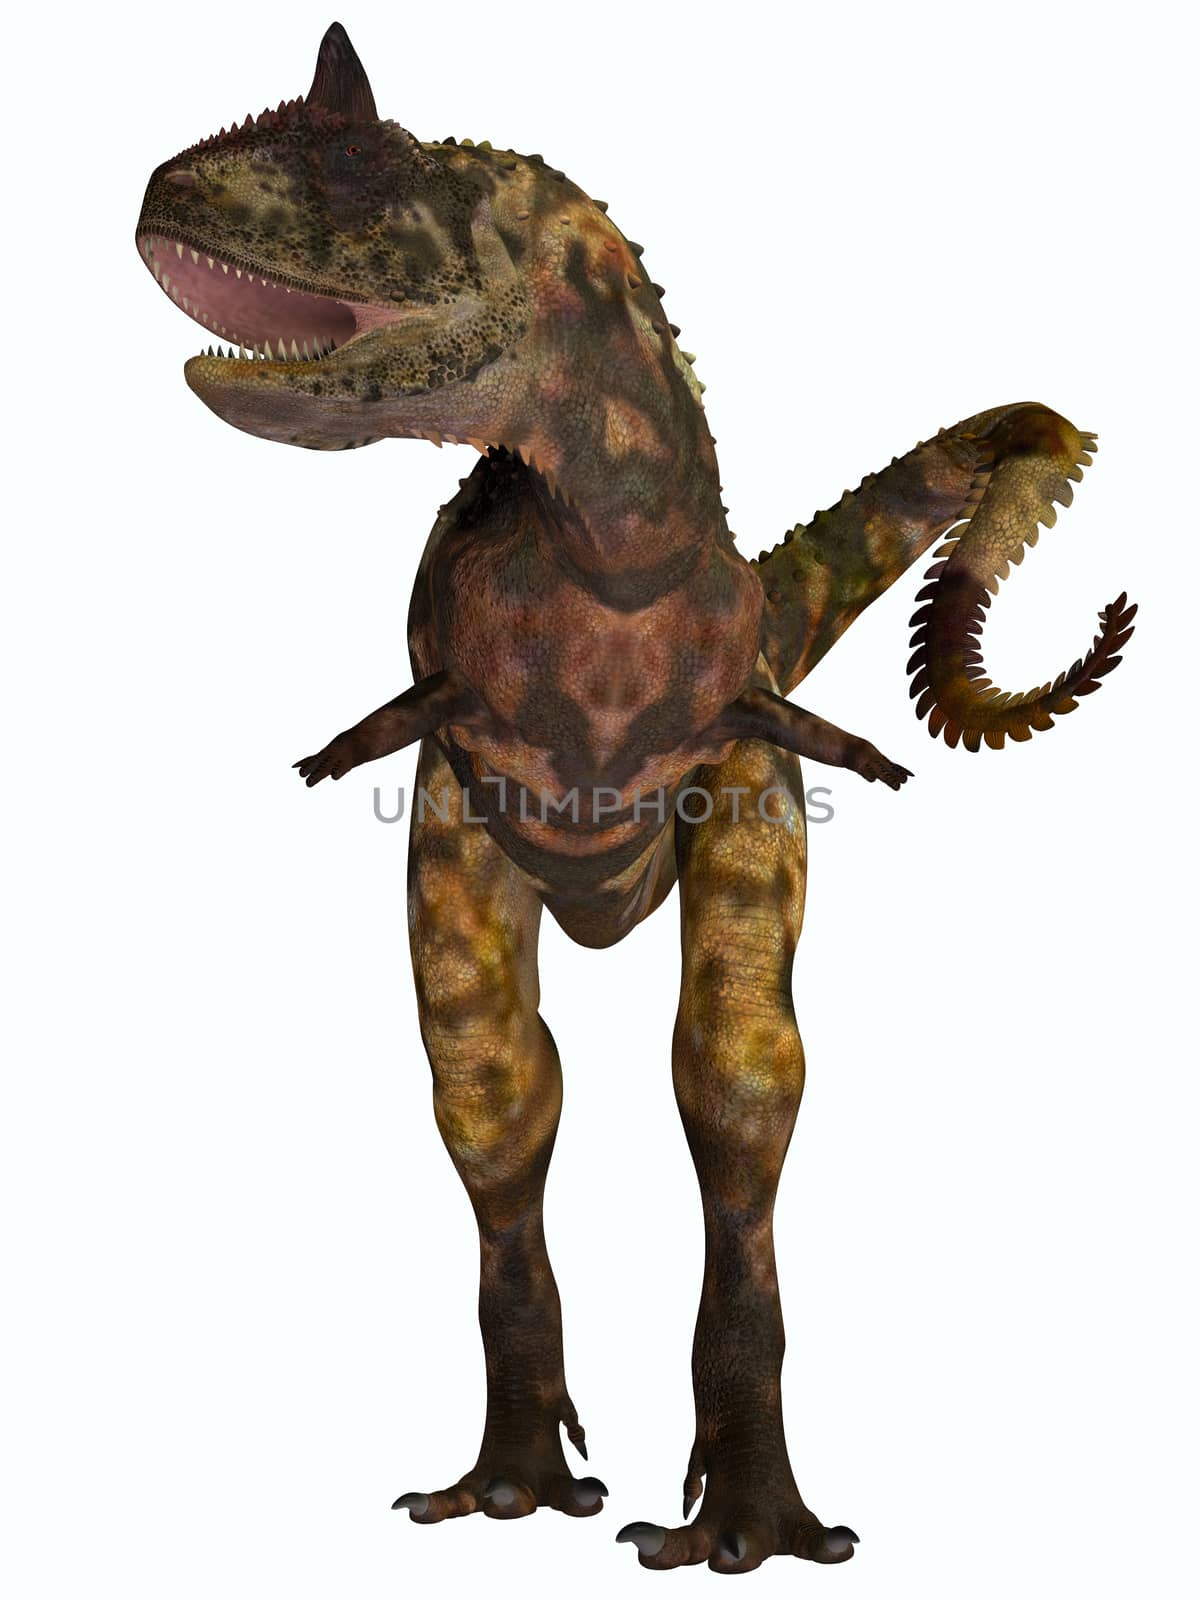 Carnotaurus was a theropod carnivorous dinosaur that lived in Argentina in the Cretaceous Period.